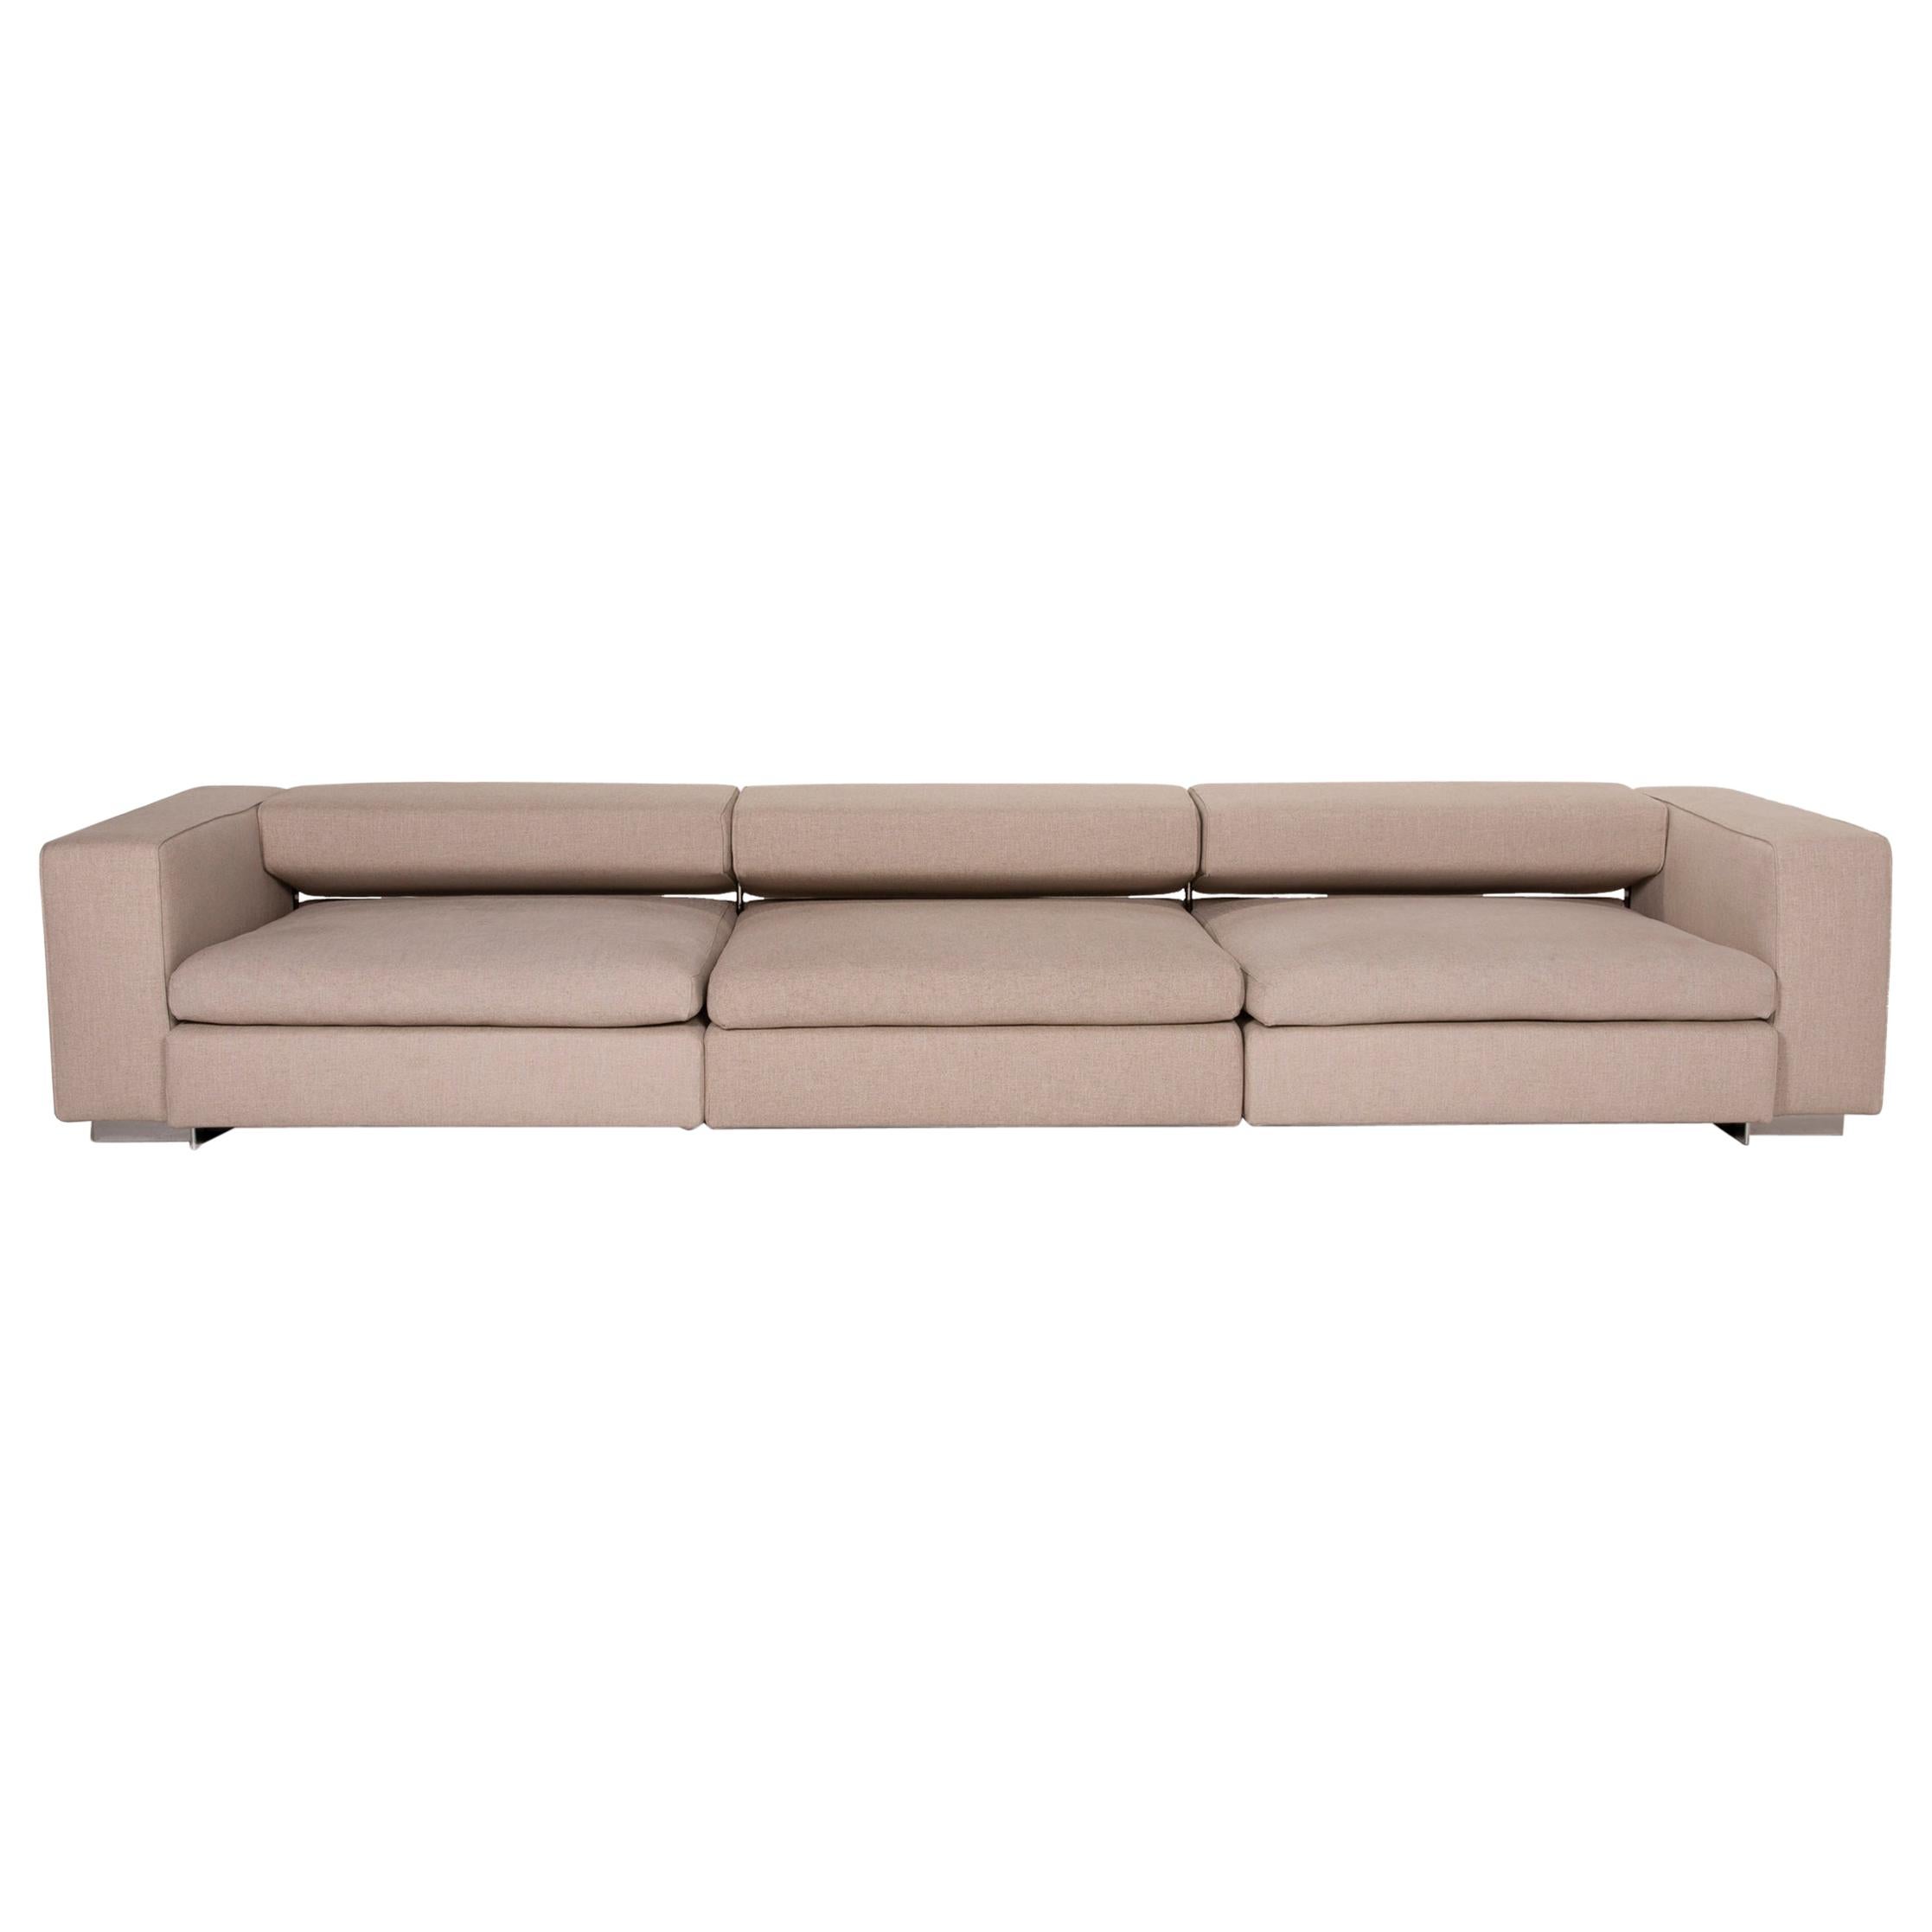 Molteni Turner Fabric Sofa Beige Three-Seater Function For Sale